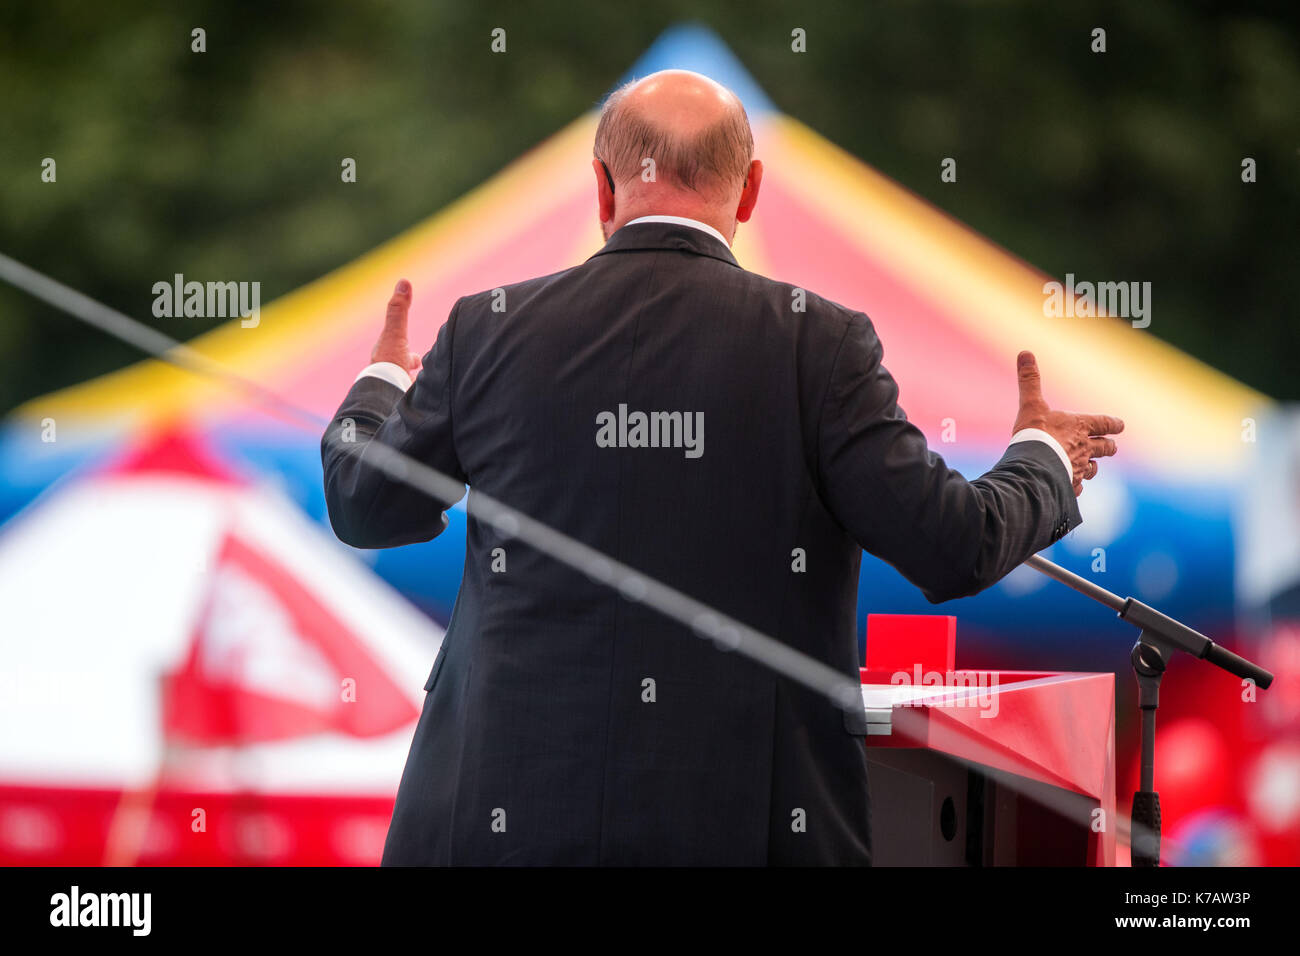 Schwerin, Germany. 15th Sep, 2017. Martin Schulz, candidate for chancellorship from the Social Democratic Party of Germany (SPD), speaking at an election campaign event in front of an audience of 400 people in Schwerin, Germany, 15 September 2017. Photo: Jens Büttner/dpa-Zentralbild/dpa/Alamy Live News Stock Photo